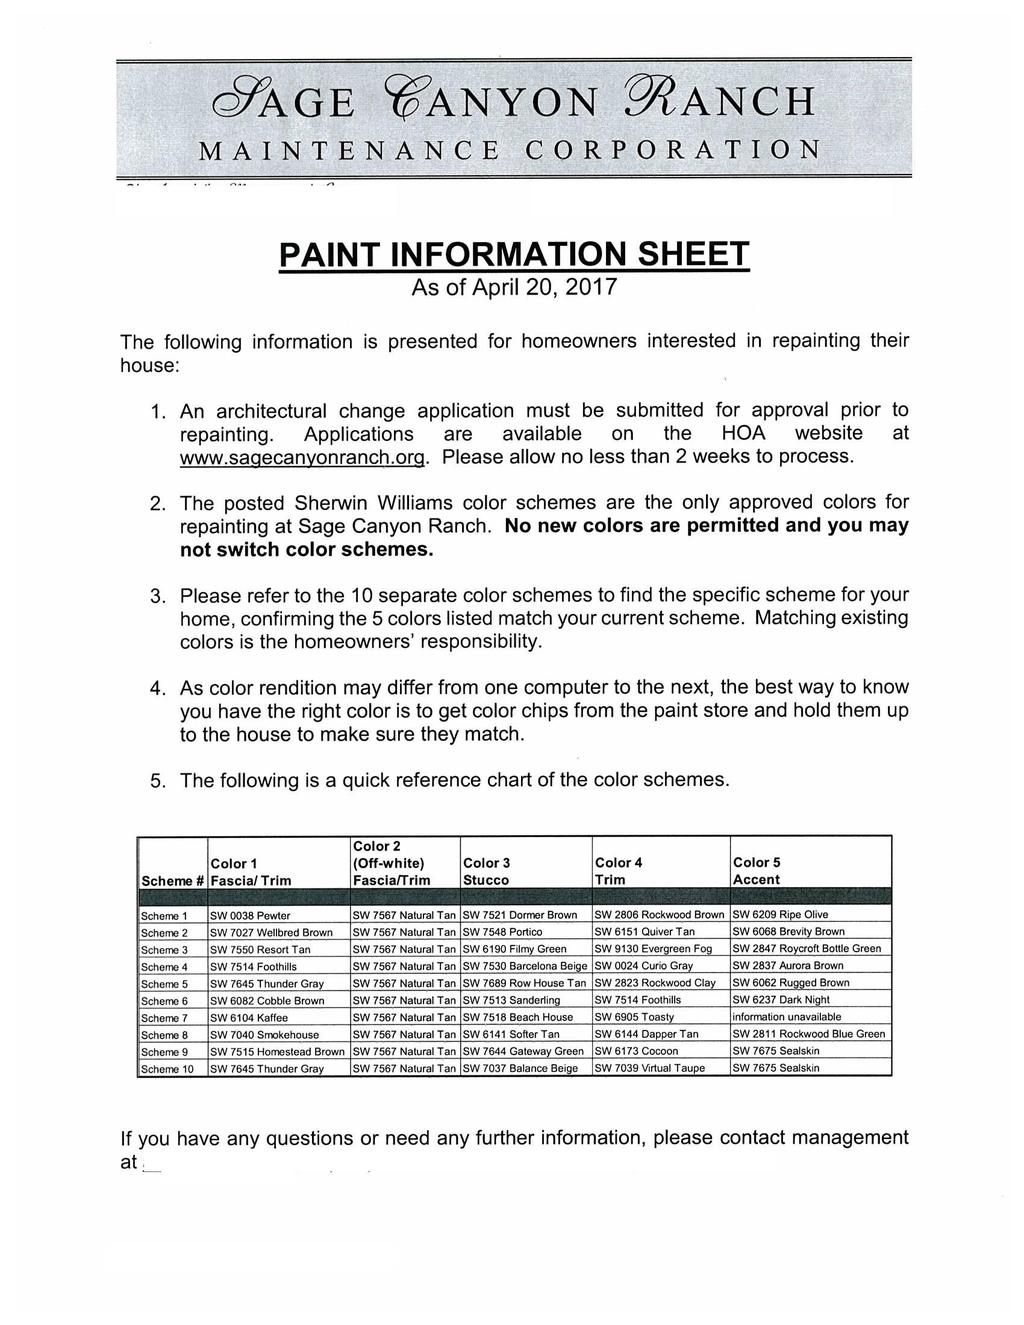 a9age WANYON PilANCH MAINTENANCE CORPORATION PAINT INFORMATION SHEET As of April 20, 2017 The following information is presented for homeowners interested in repainting their house: 1.